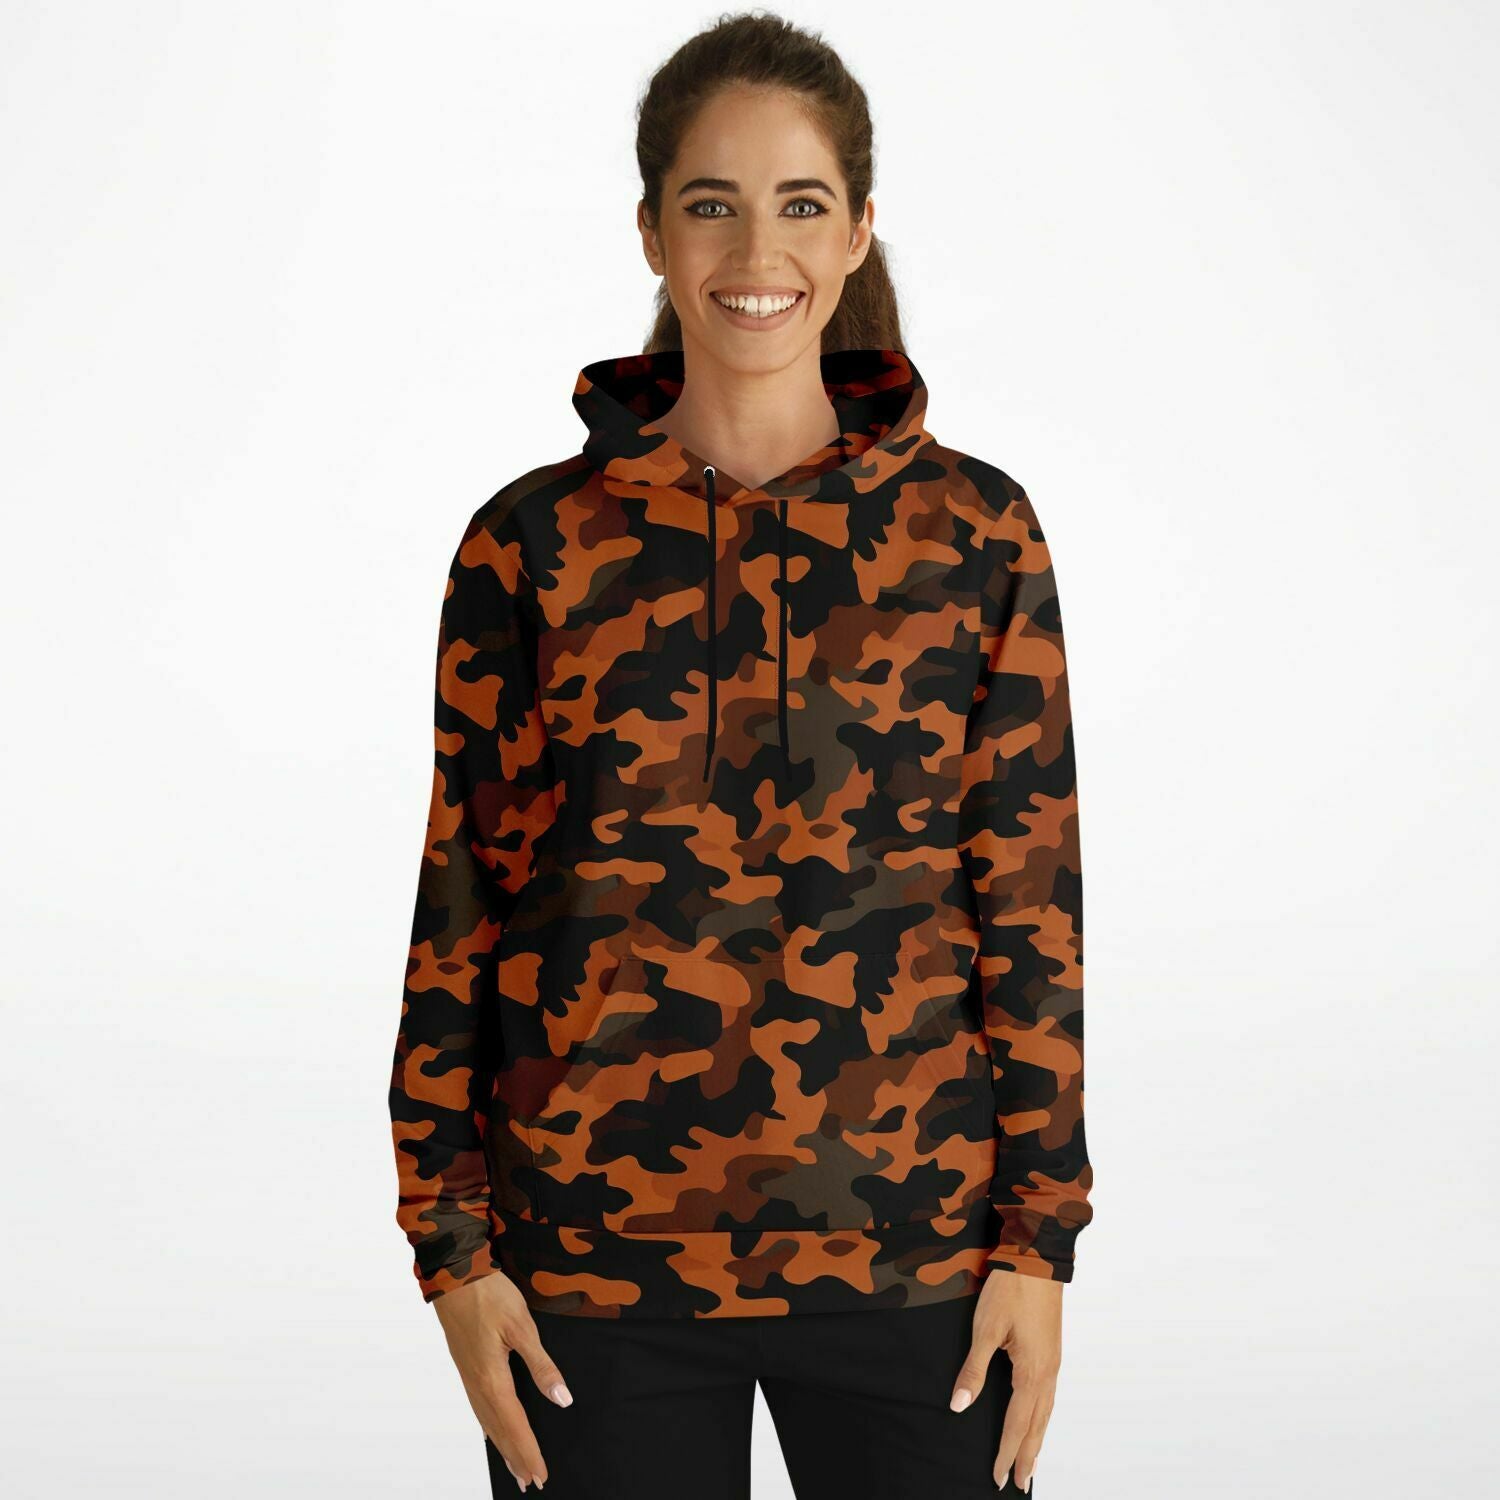 Black and Orange Camo Hoodie, Camouflage Pullover Men Women Adult Aesthetic  Graphic Cotton Hooded Sweatshirt with Pockets